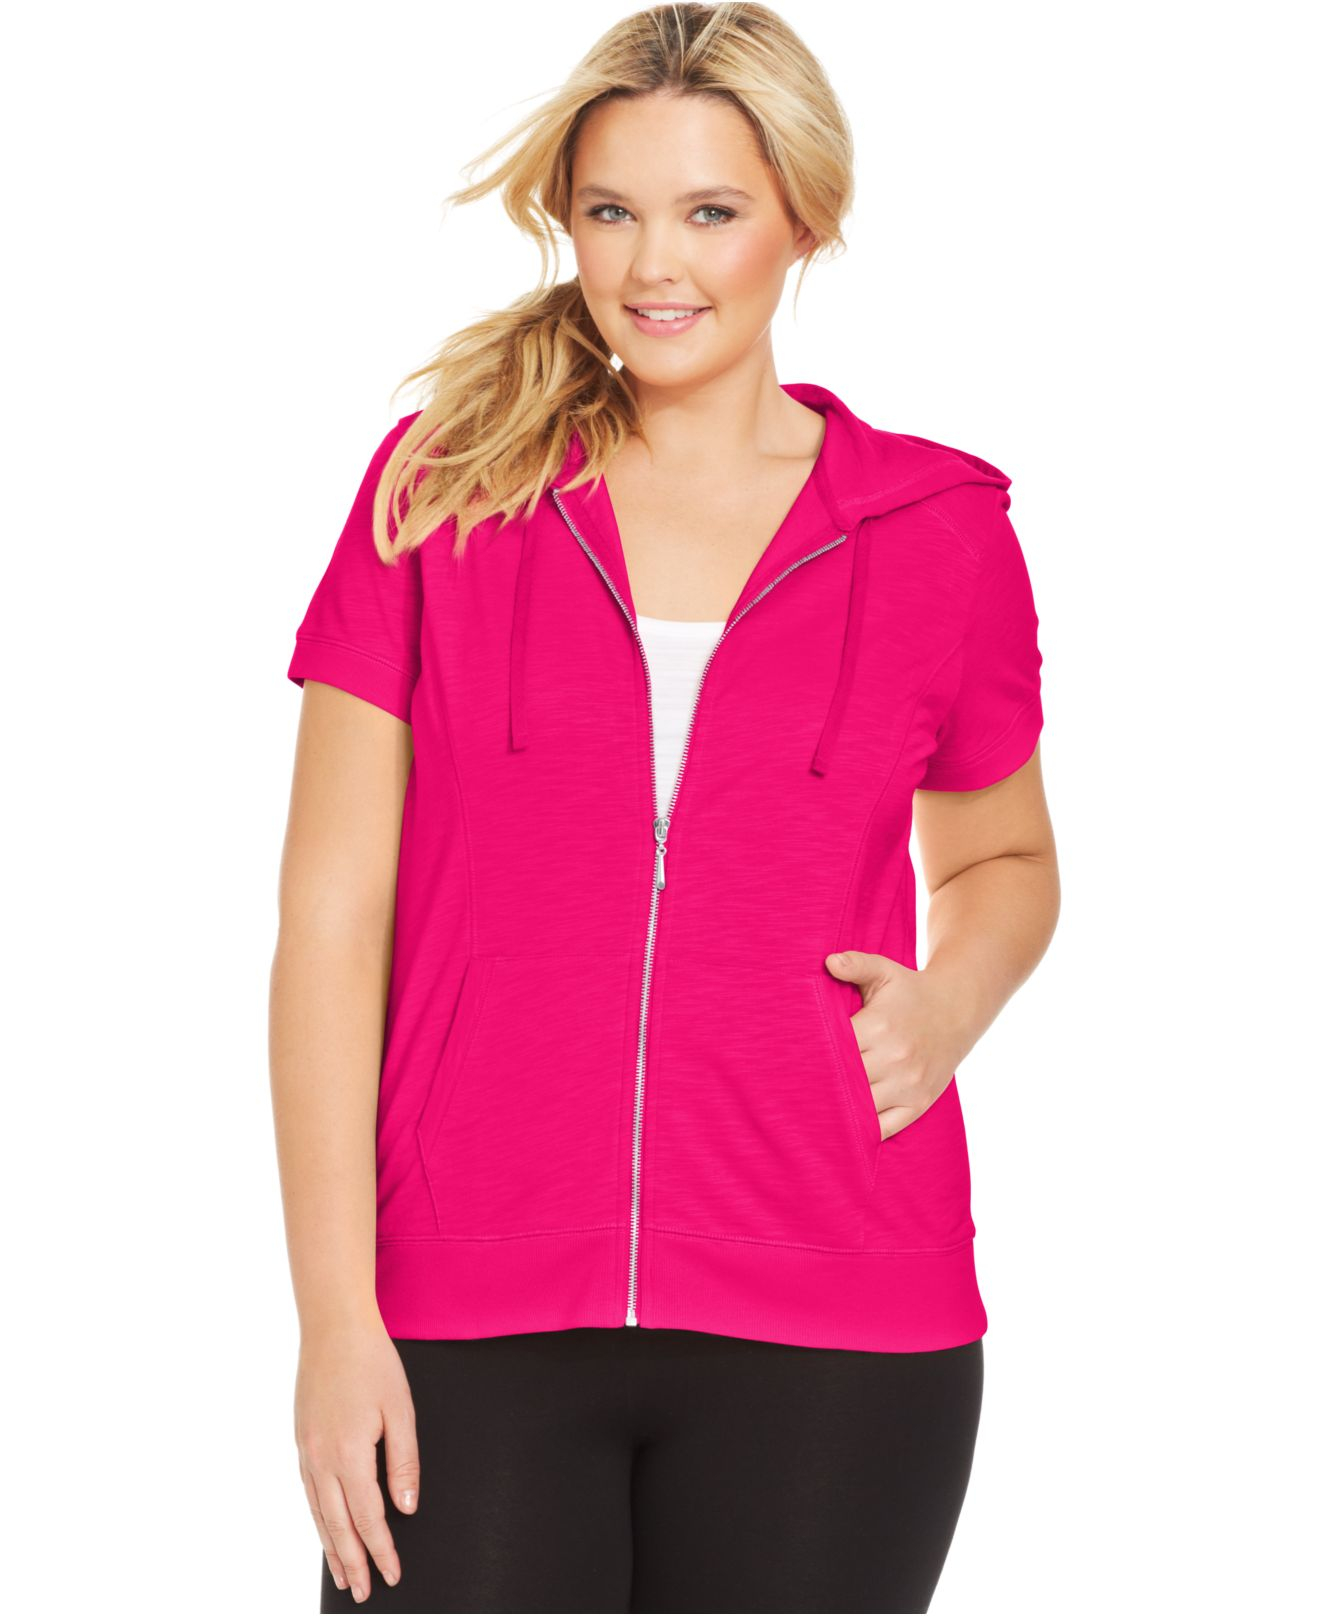 Styleco Pink Breeze Sport Plus Size Short Sleeve Hoodie Pink Product 0 932142336 Normal 